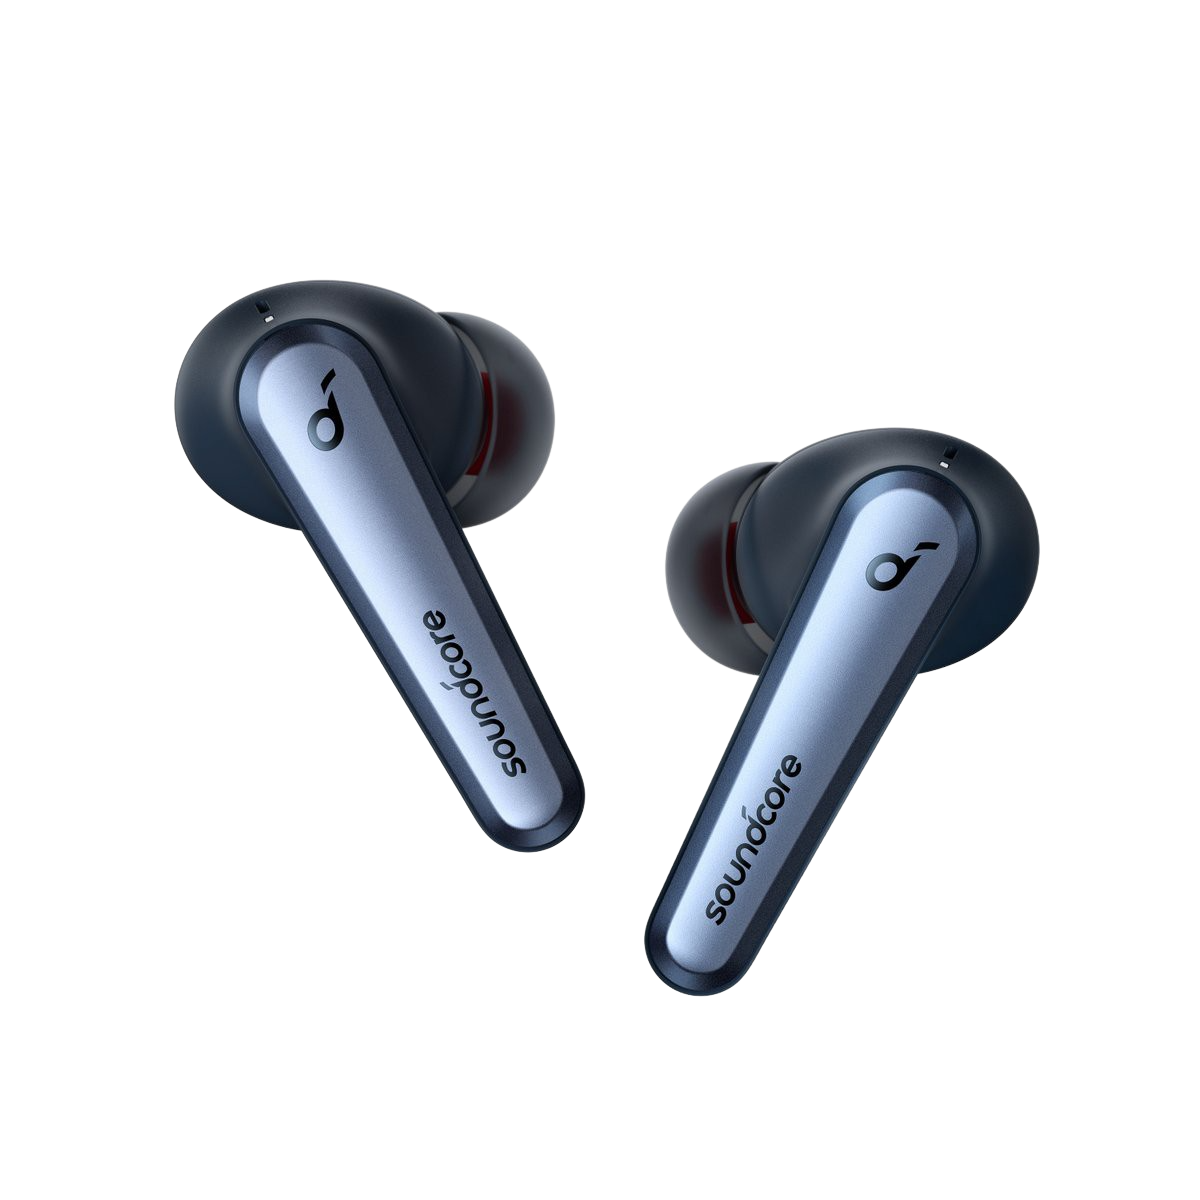 Sapphire Blue Anker Soundcore Liberty Air 2 Pro Noise-cancelling In-ear Bluetooth Headphones (US).1